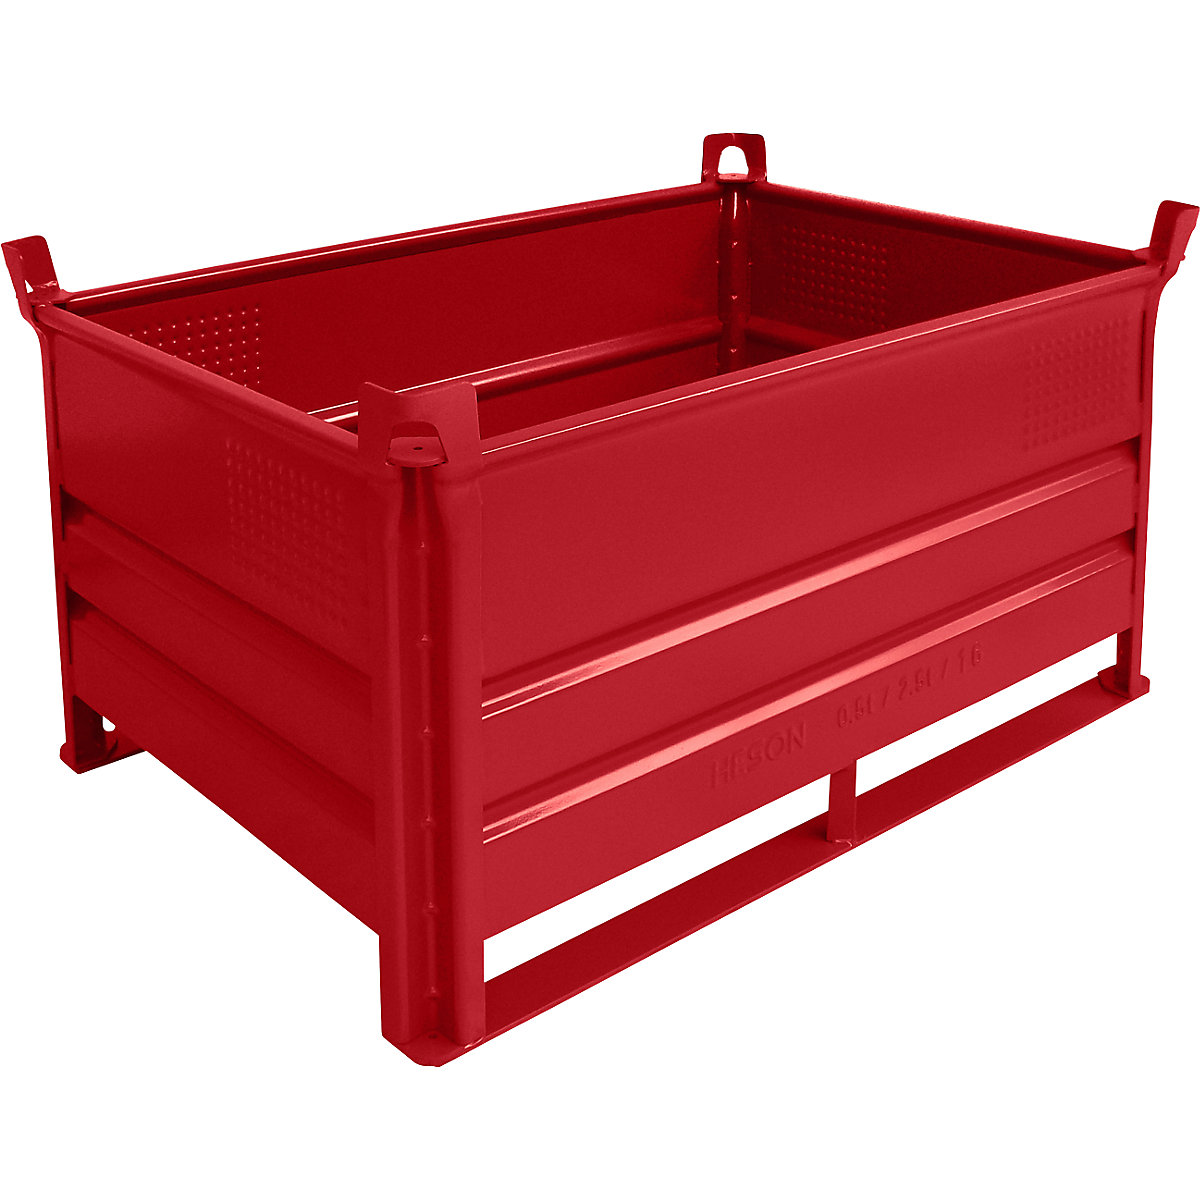 Stacking container with runners – Heson, LxW 1200 x 800 mm, max. load 500 kg, red, 1+ items-4